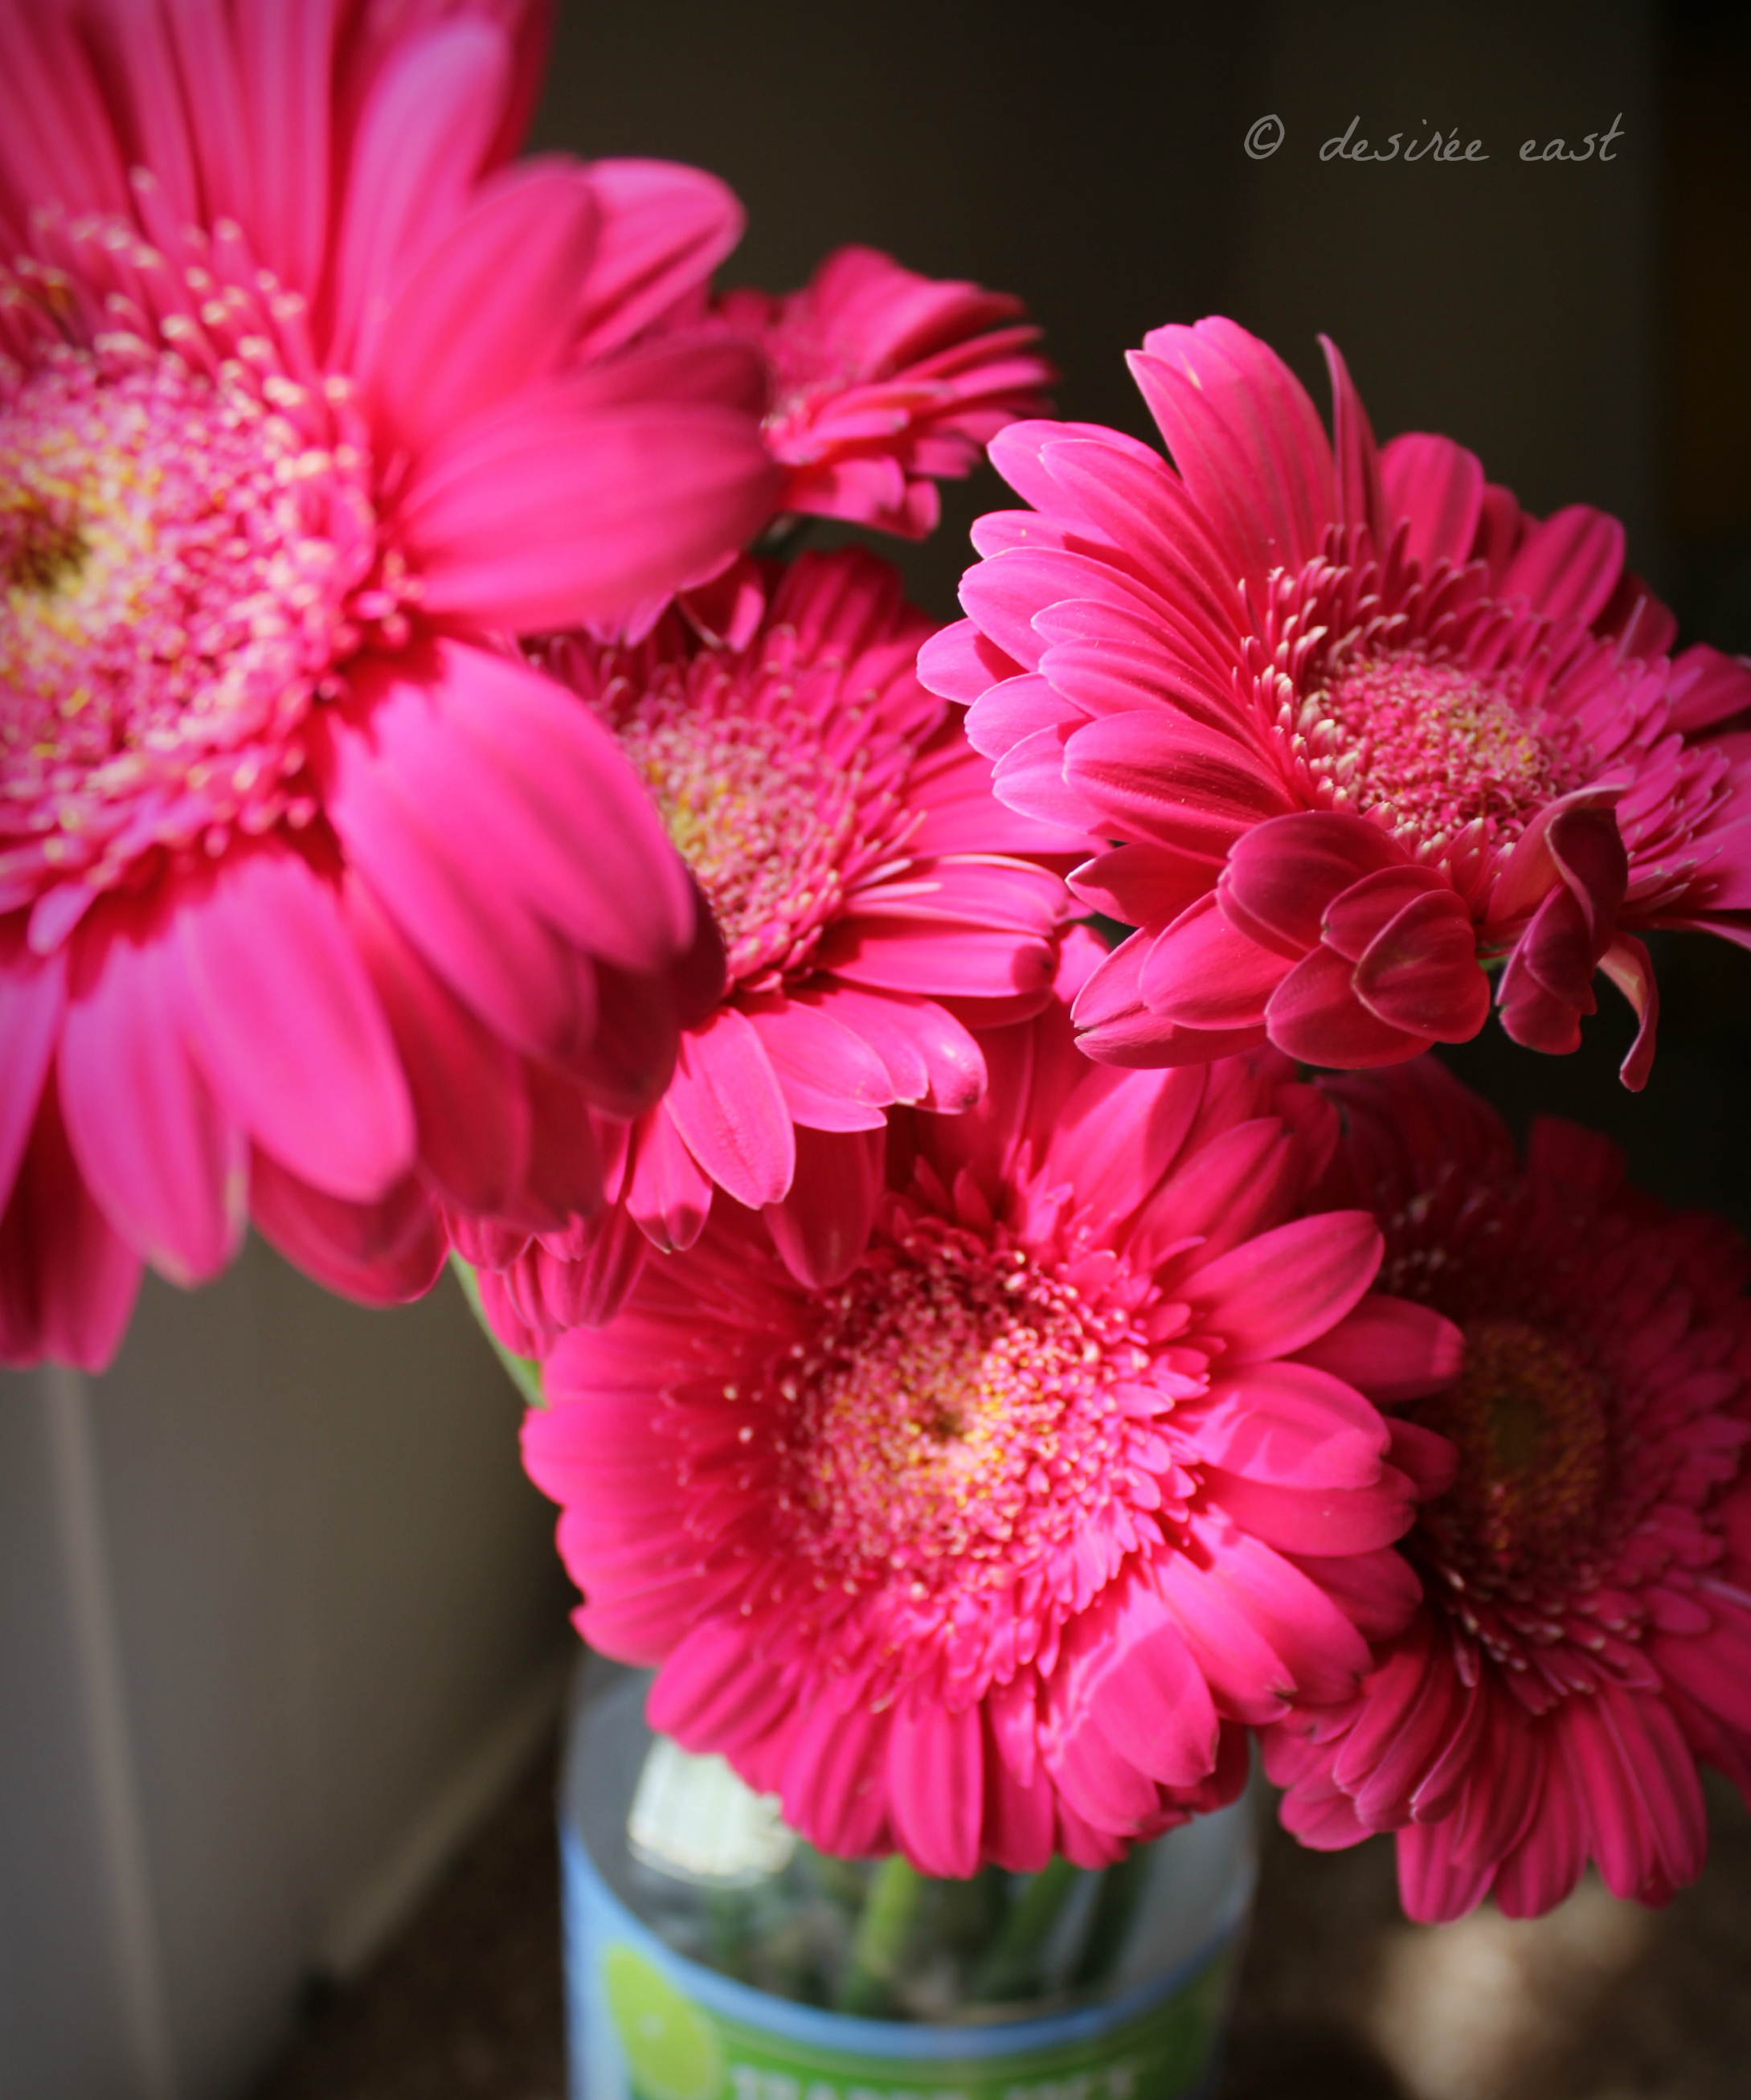 bright, beautiful gerbera daisies. birthday flowers from the hubby. photo by desiree east